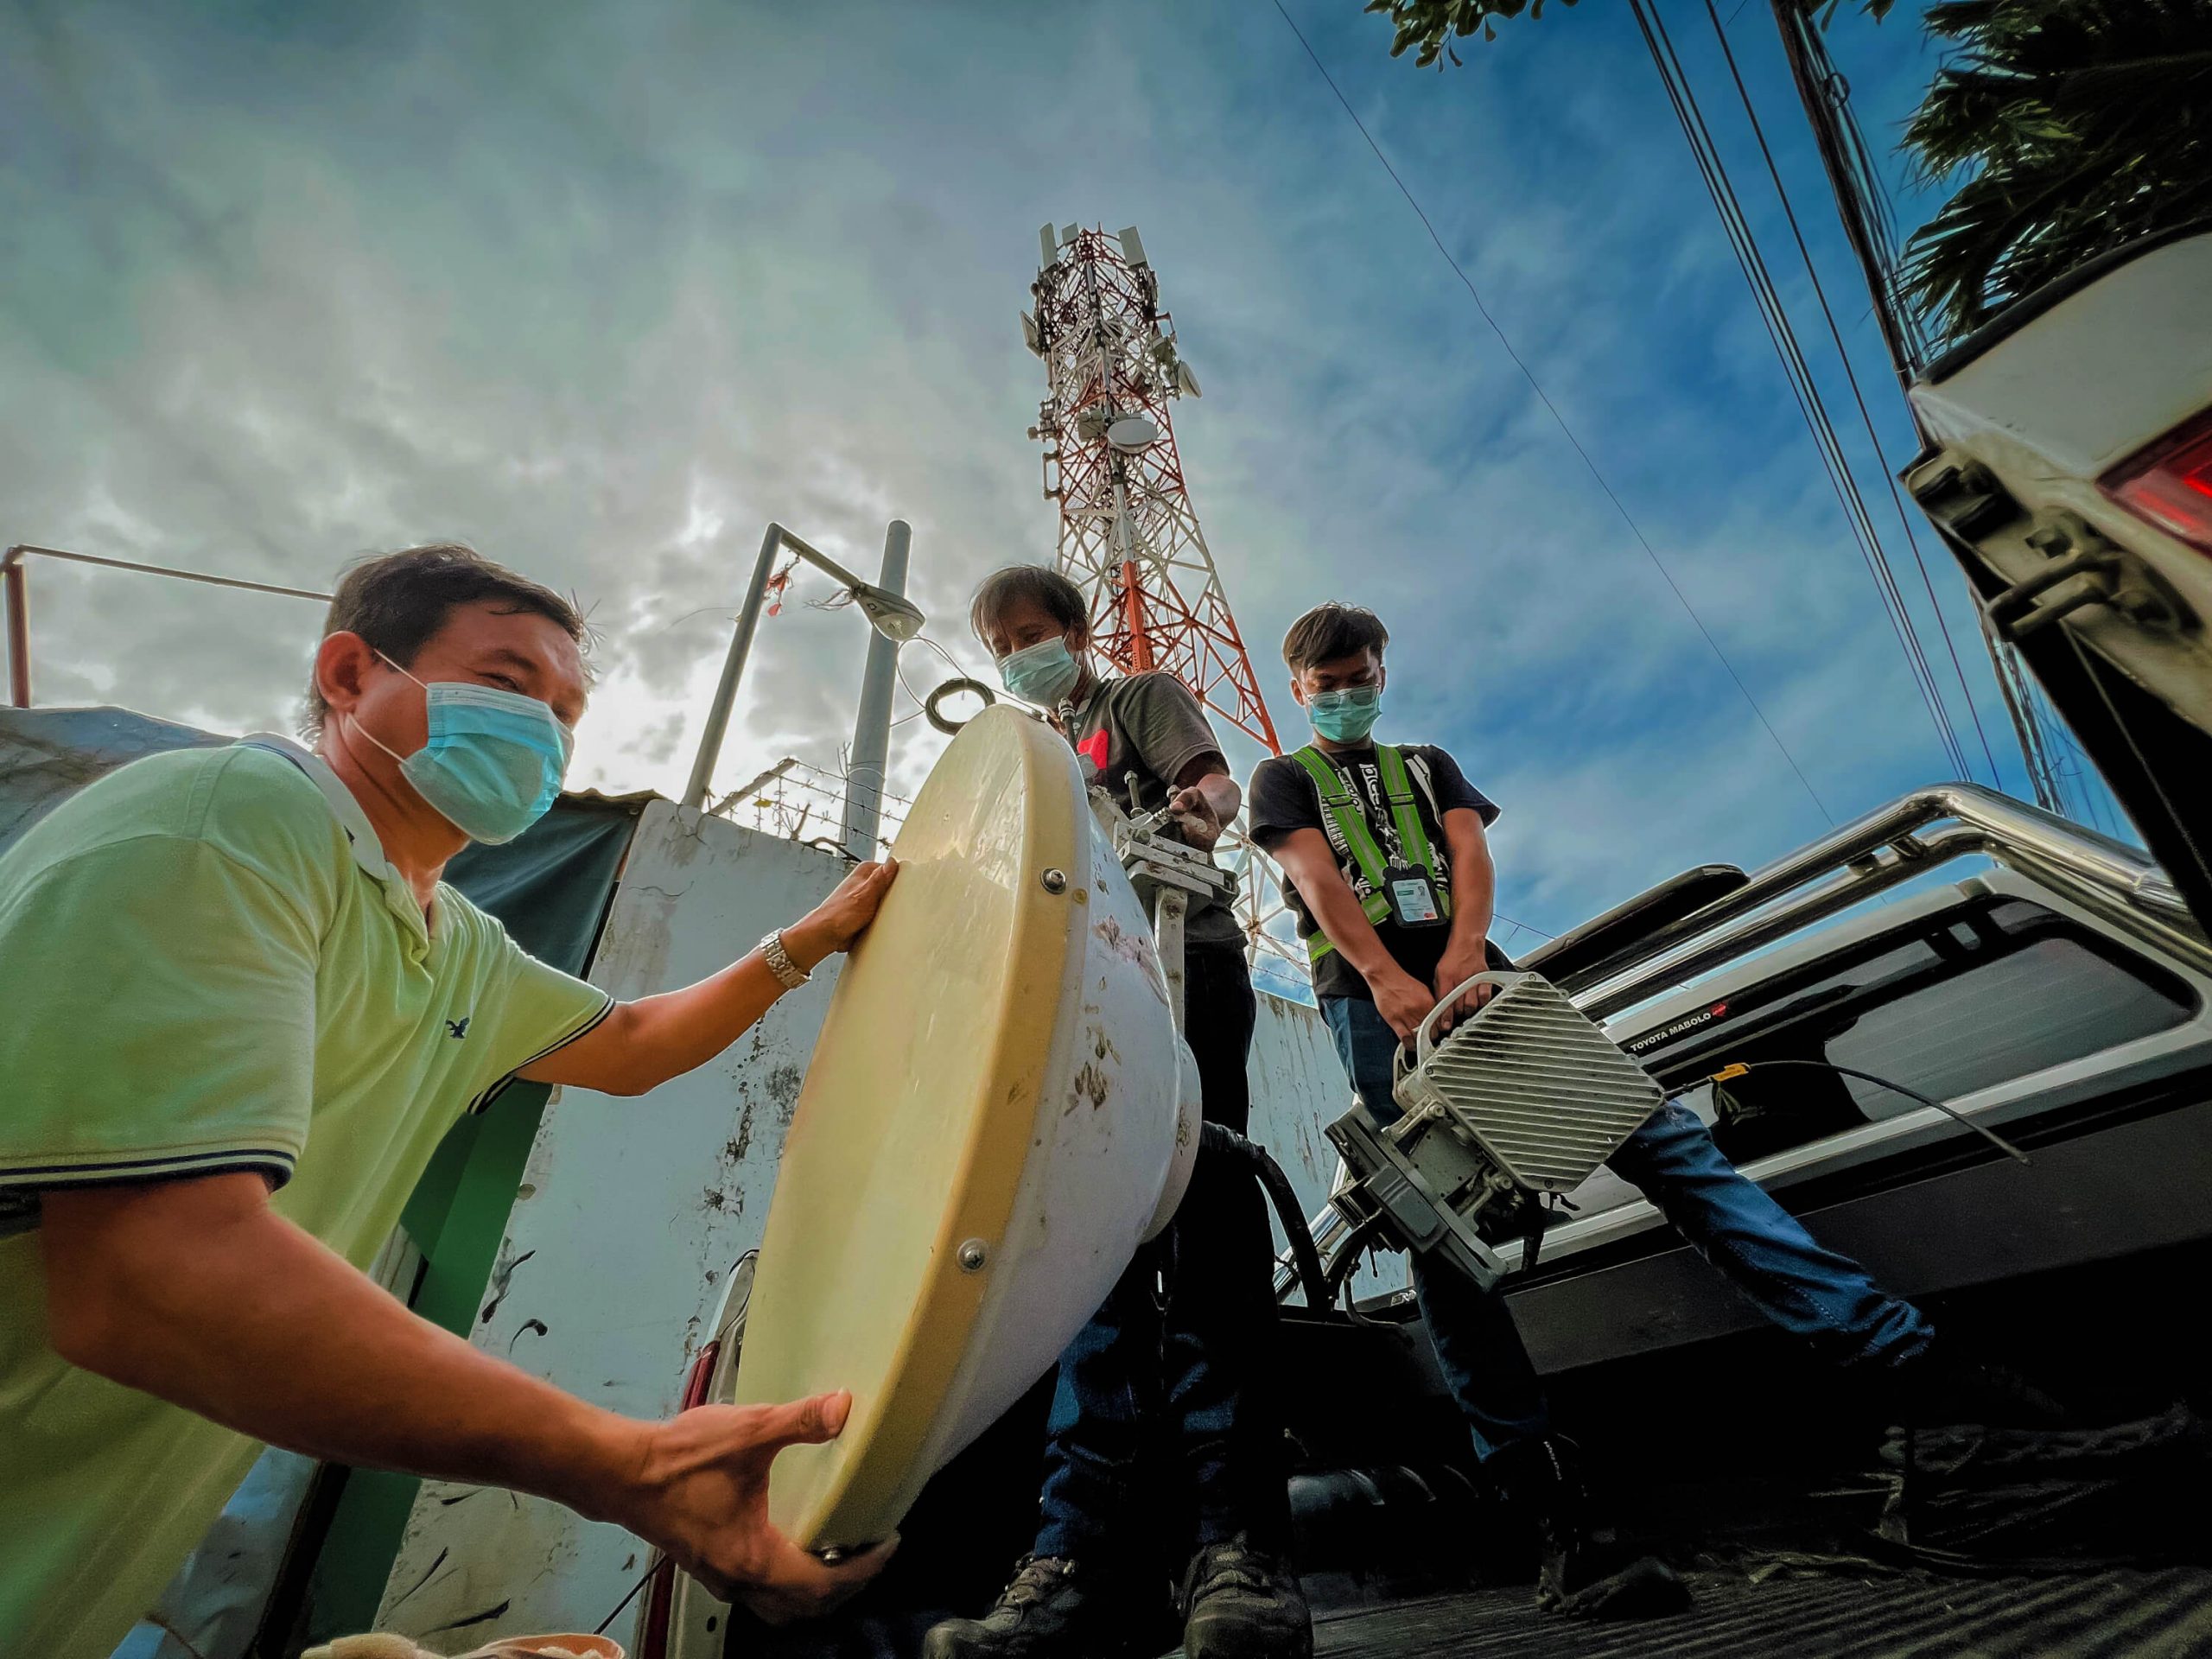 Smart engineers carry outdoor equipment weighing 60 kilograms for a cell site serving Cordova, Cebu.